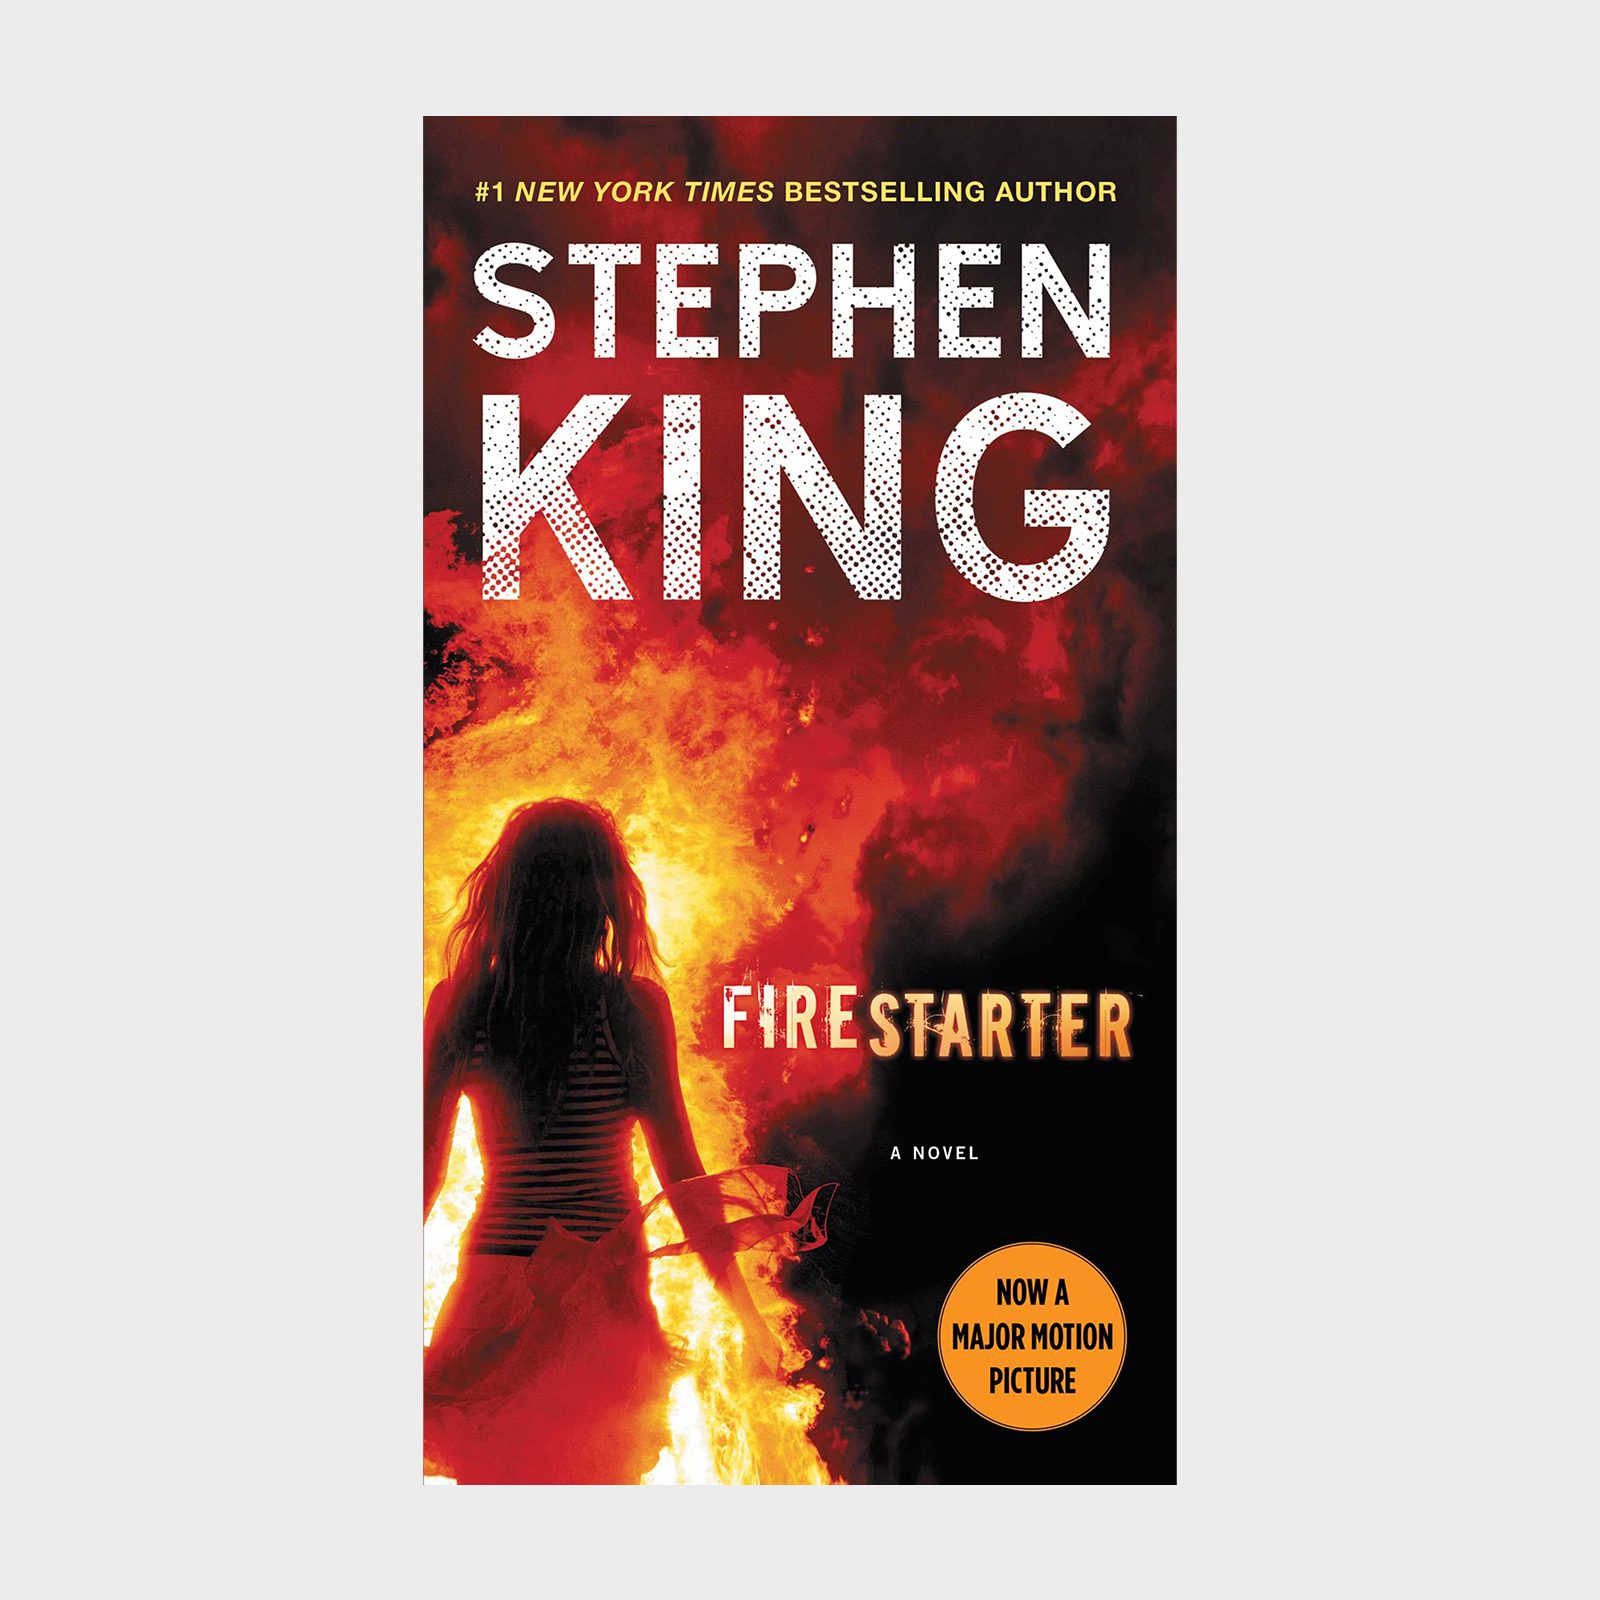 Best Stephen King Books: 8 Best Stephen King Books on  for Horror  Aficionados Starting at Rs. 349 - The Economic Times